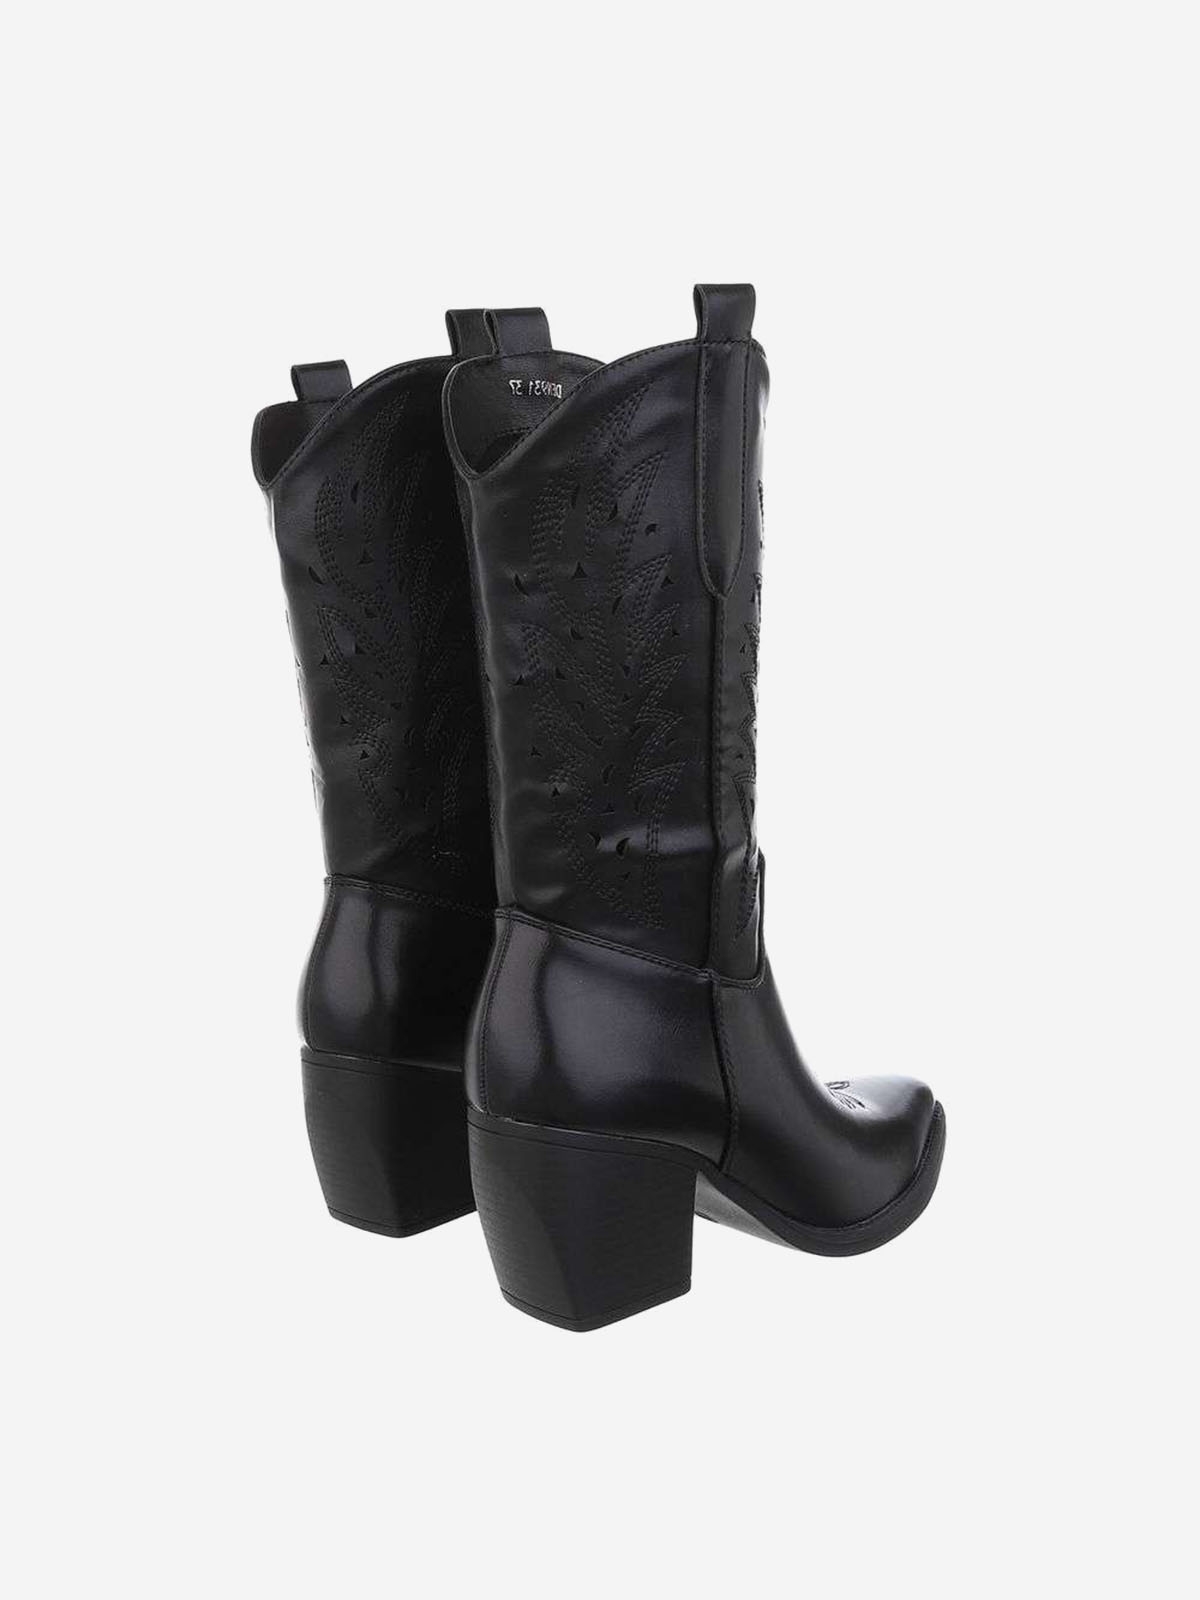 Western style women's high-heeled boots in black